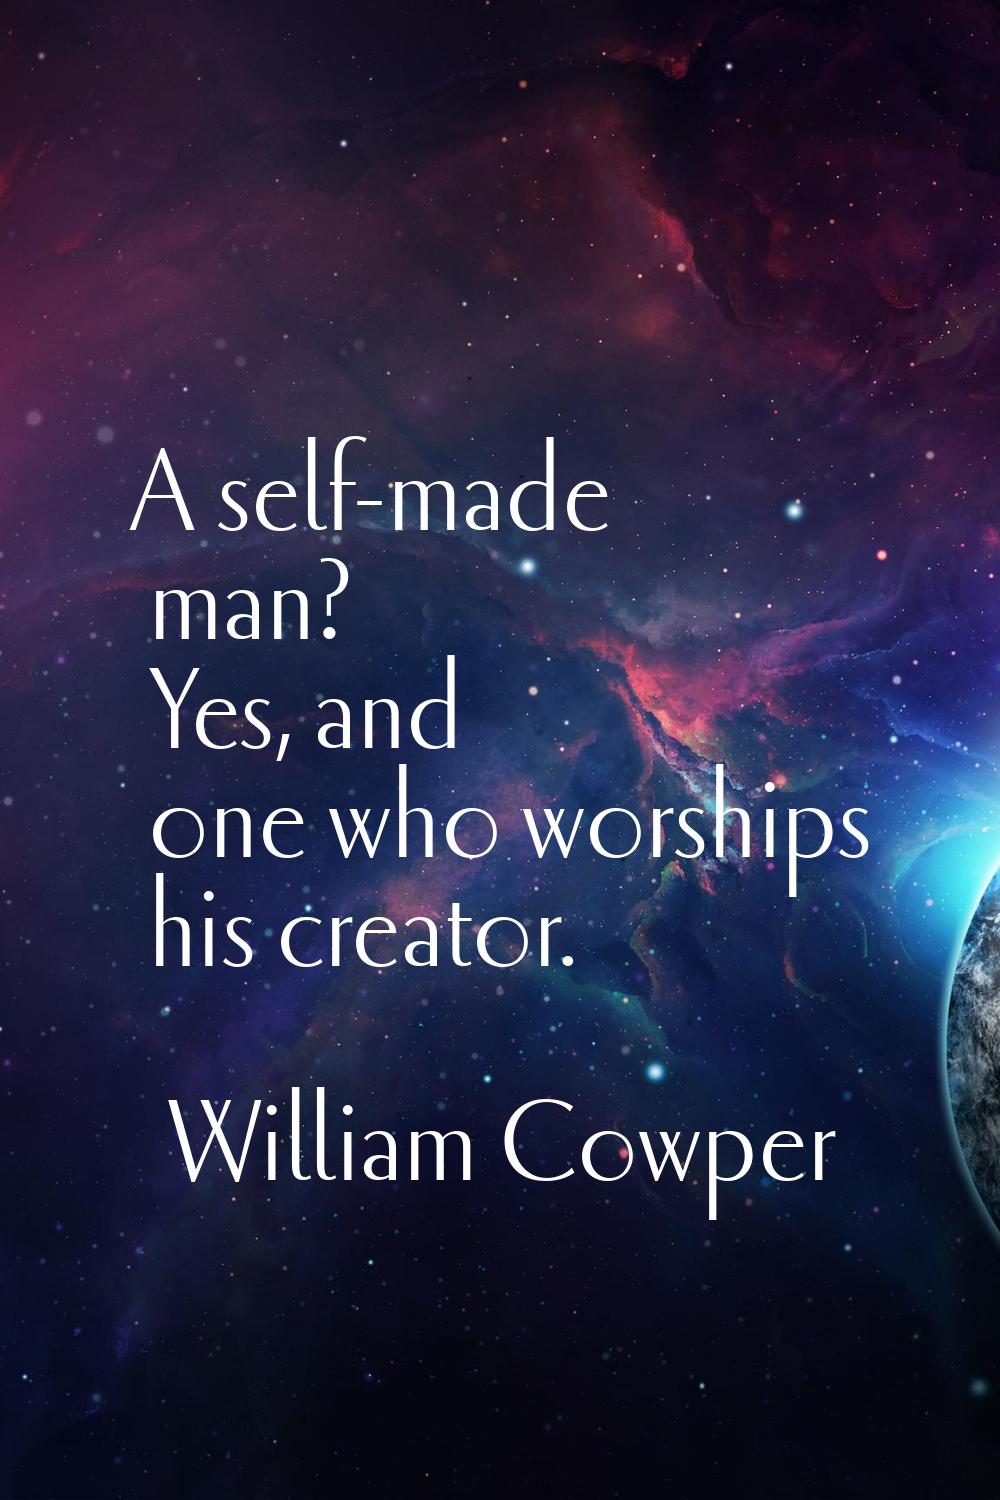 A self-made man? Yes, and one who worships his creator.